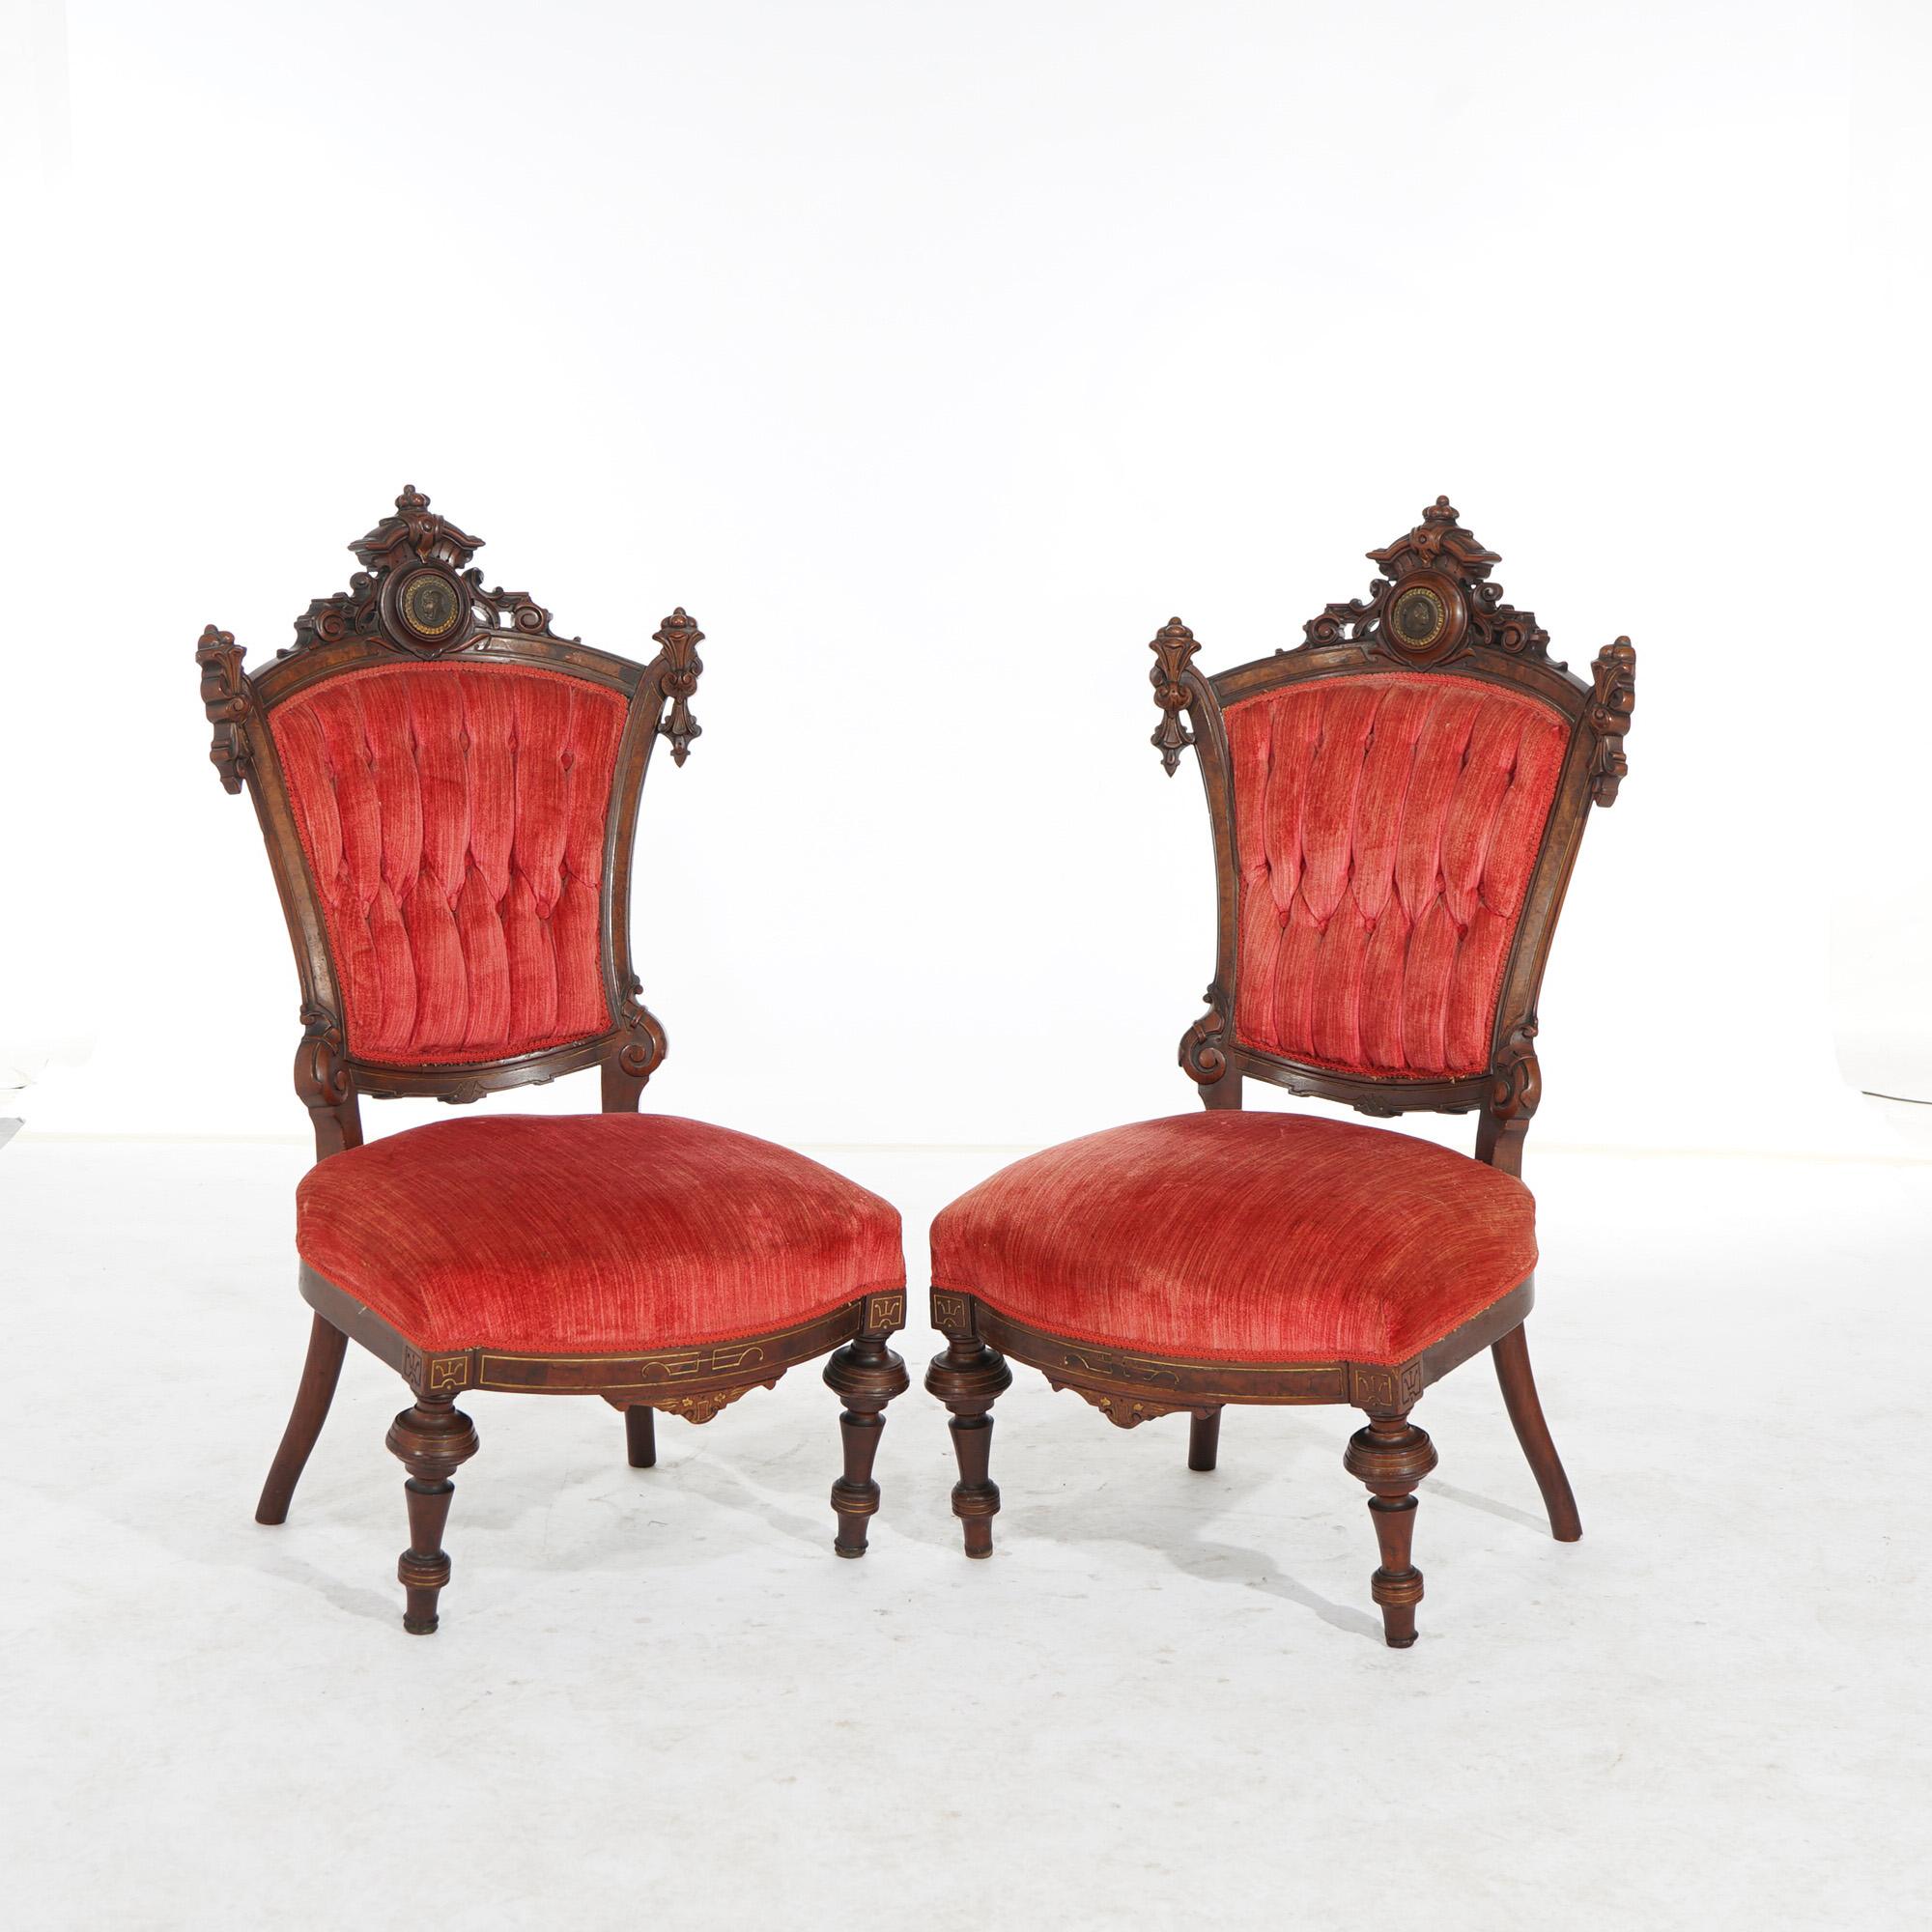 19th Century Antique Pair of Renaissance Egyptian Revival Walnut & Burl Cleopatra Side Chairs For Sale